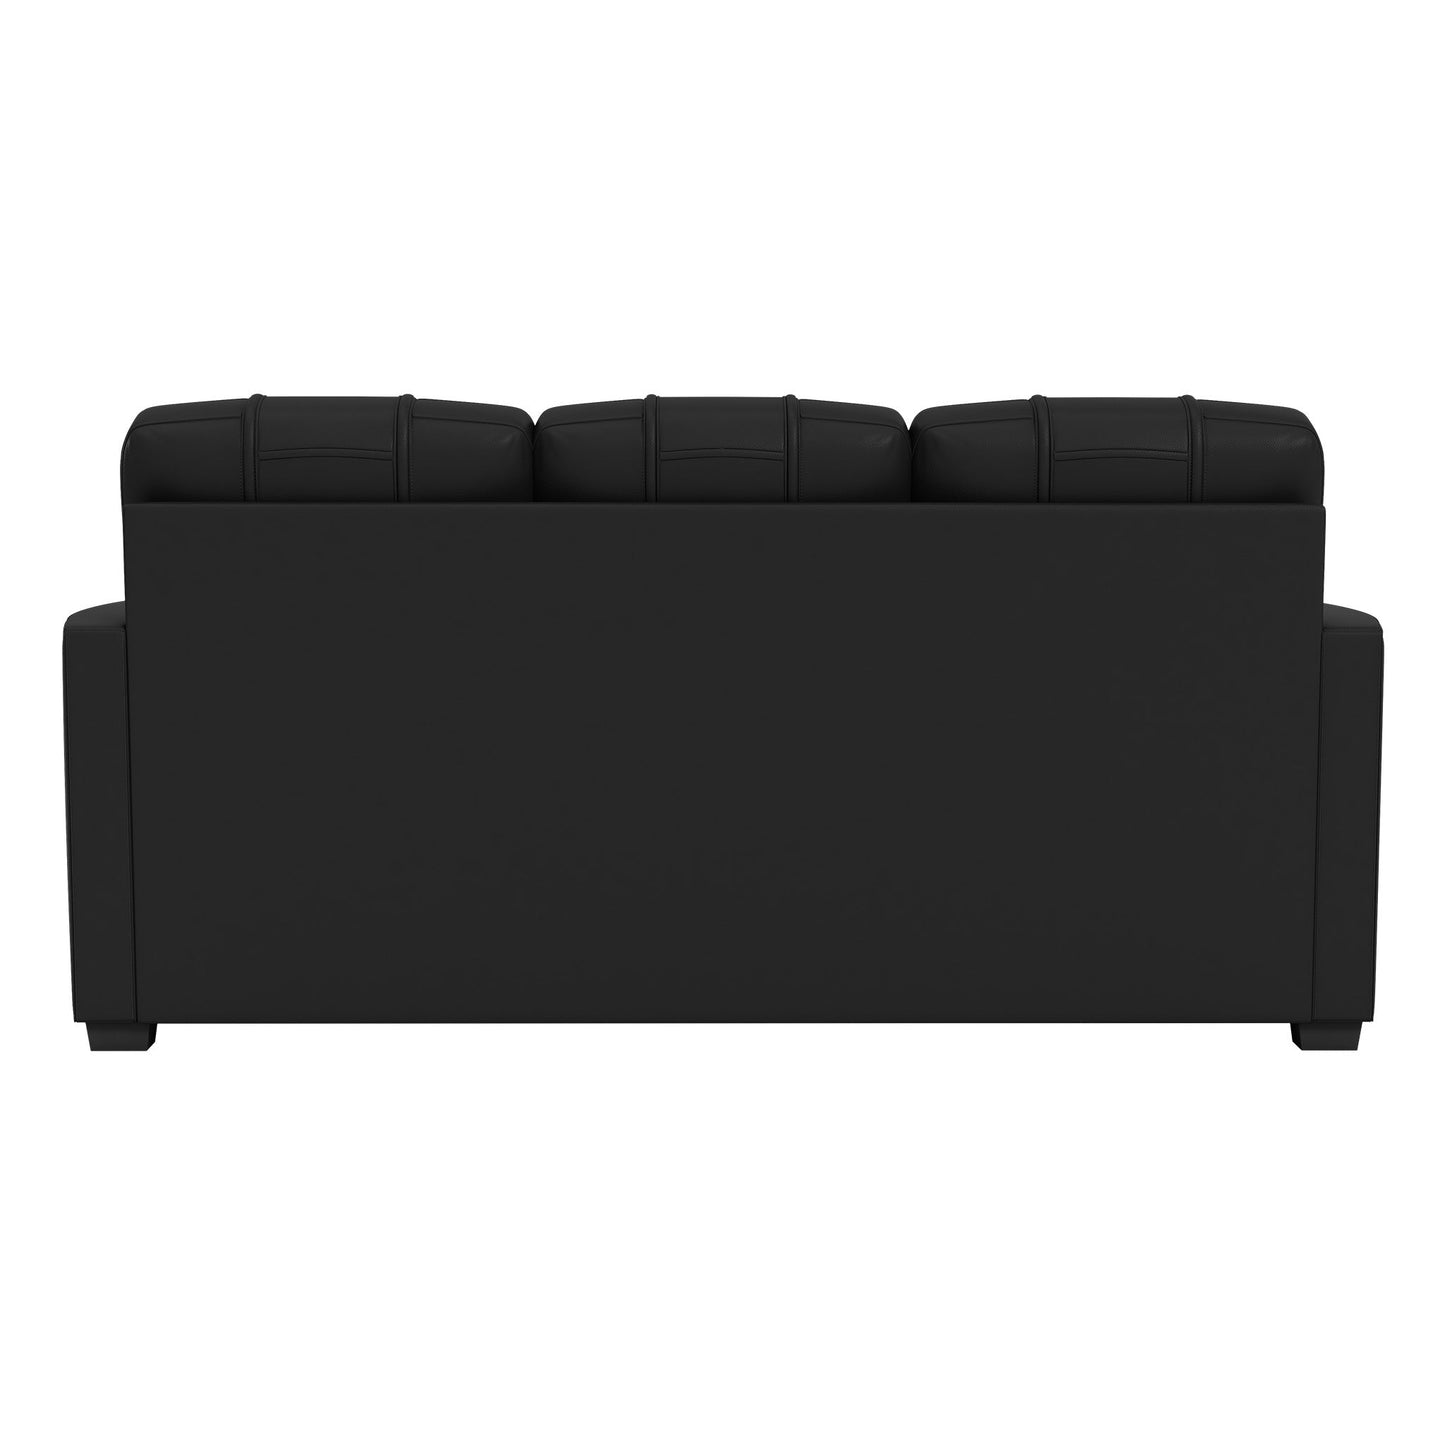 Silver Sofa with Ball State University